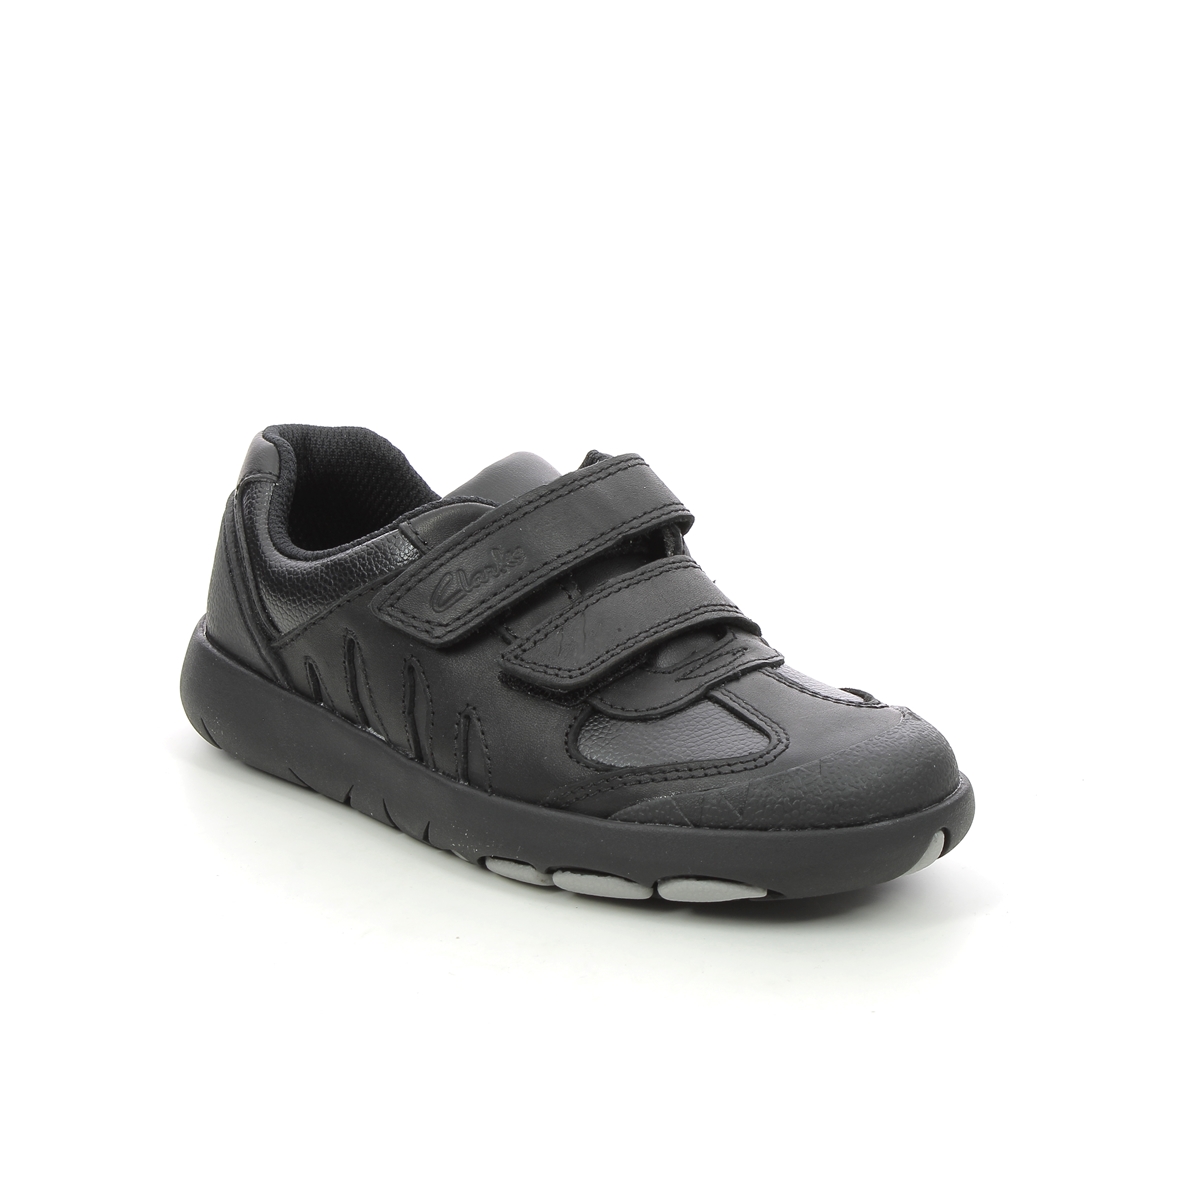 Clarks Rex Stride K Black leather Kids Boys Shoes 6269-85E in a Plain Leather in Size 10.5